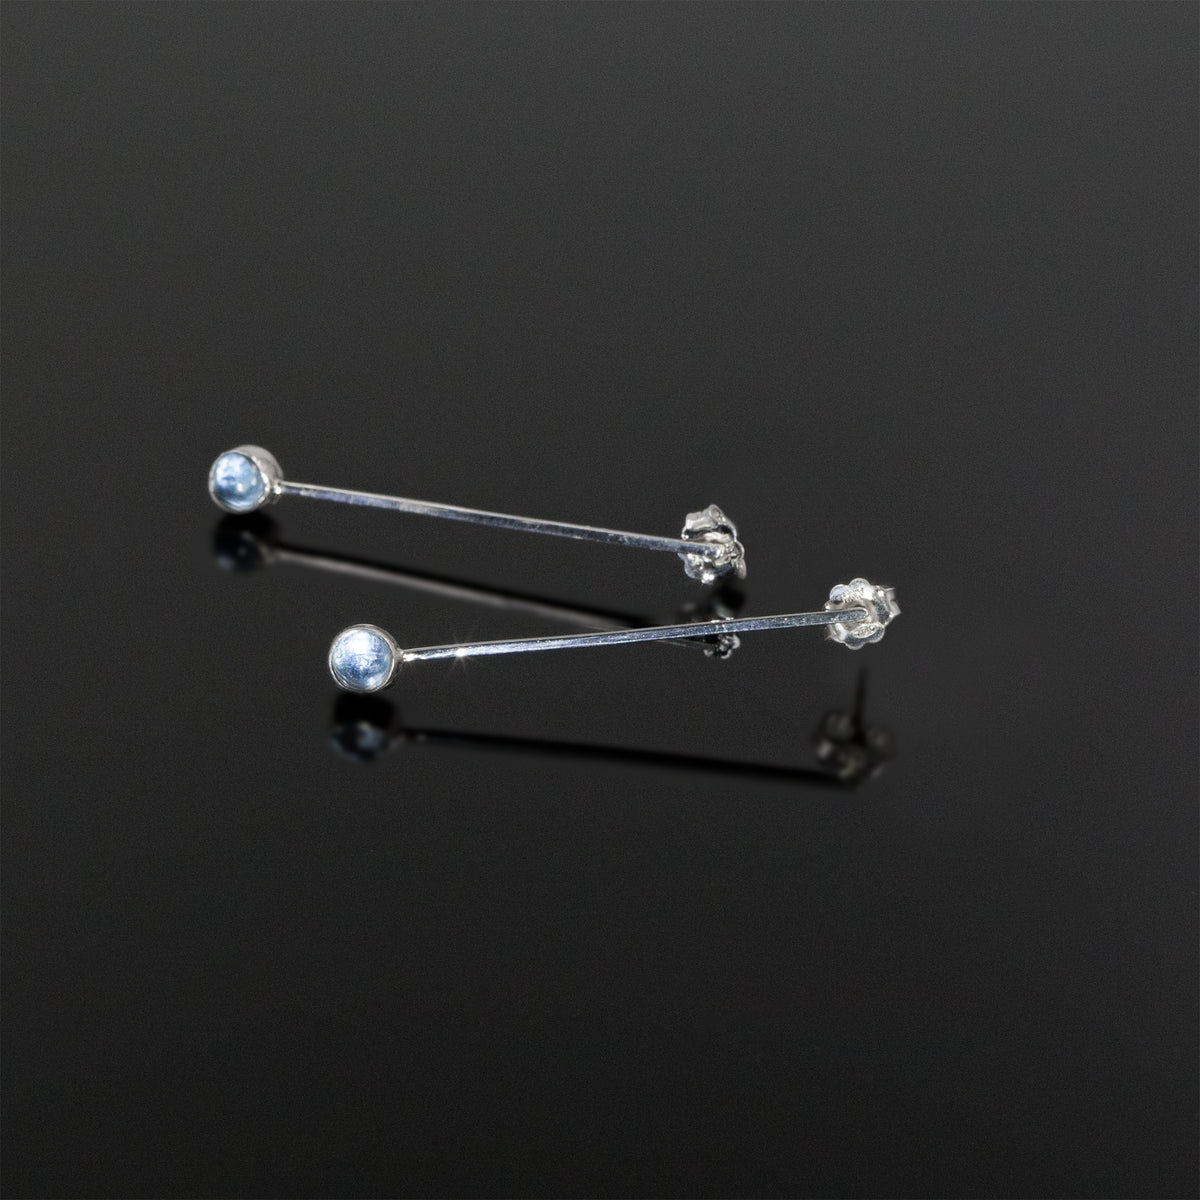 Drop in the Ocean earrings with aquamarine stones by Rouaida.